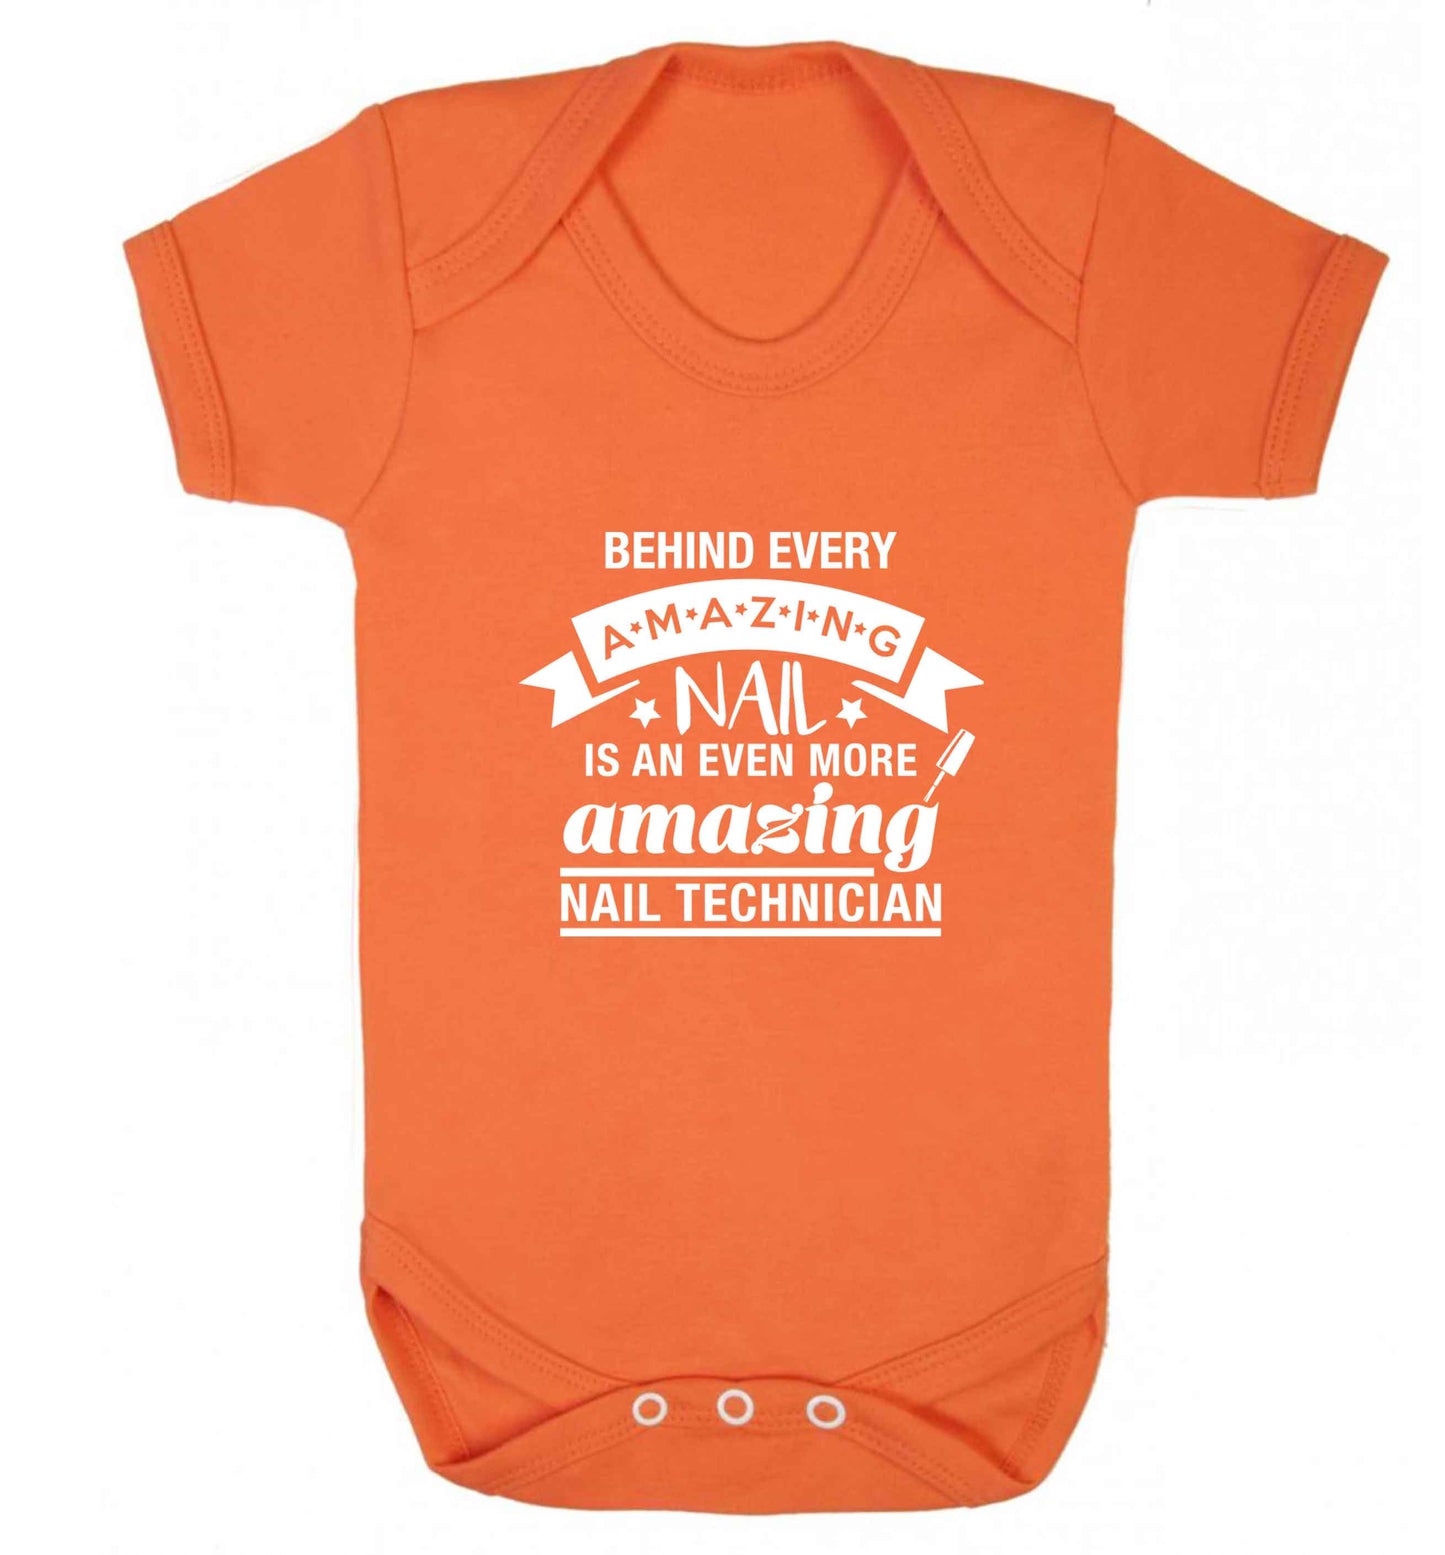 Behind every amazing nail is an even more amazing nail technician baby vest orange 18-24 months